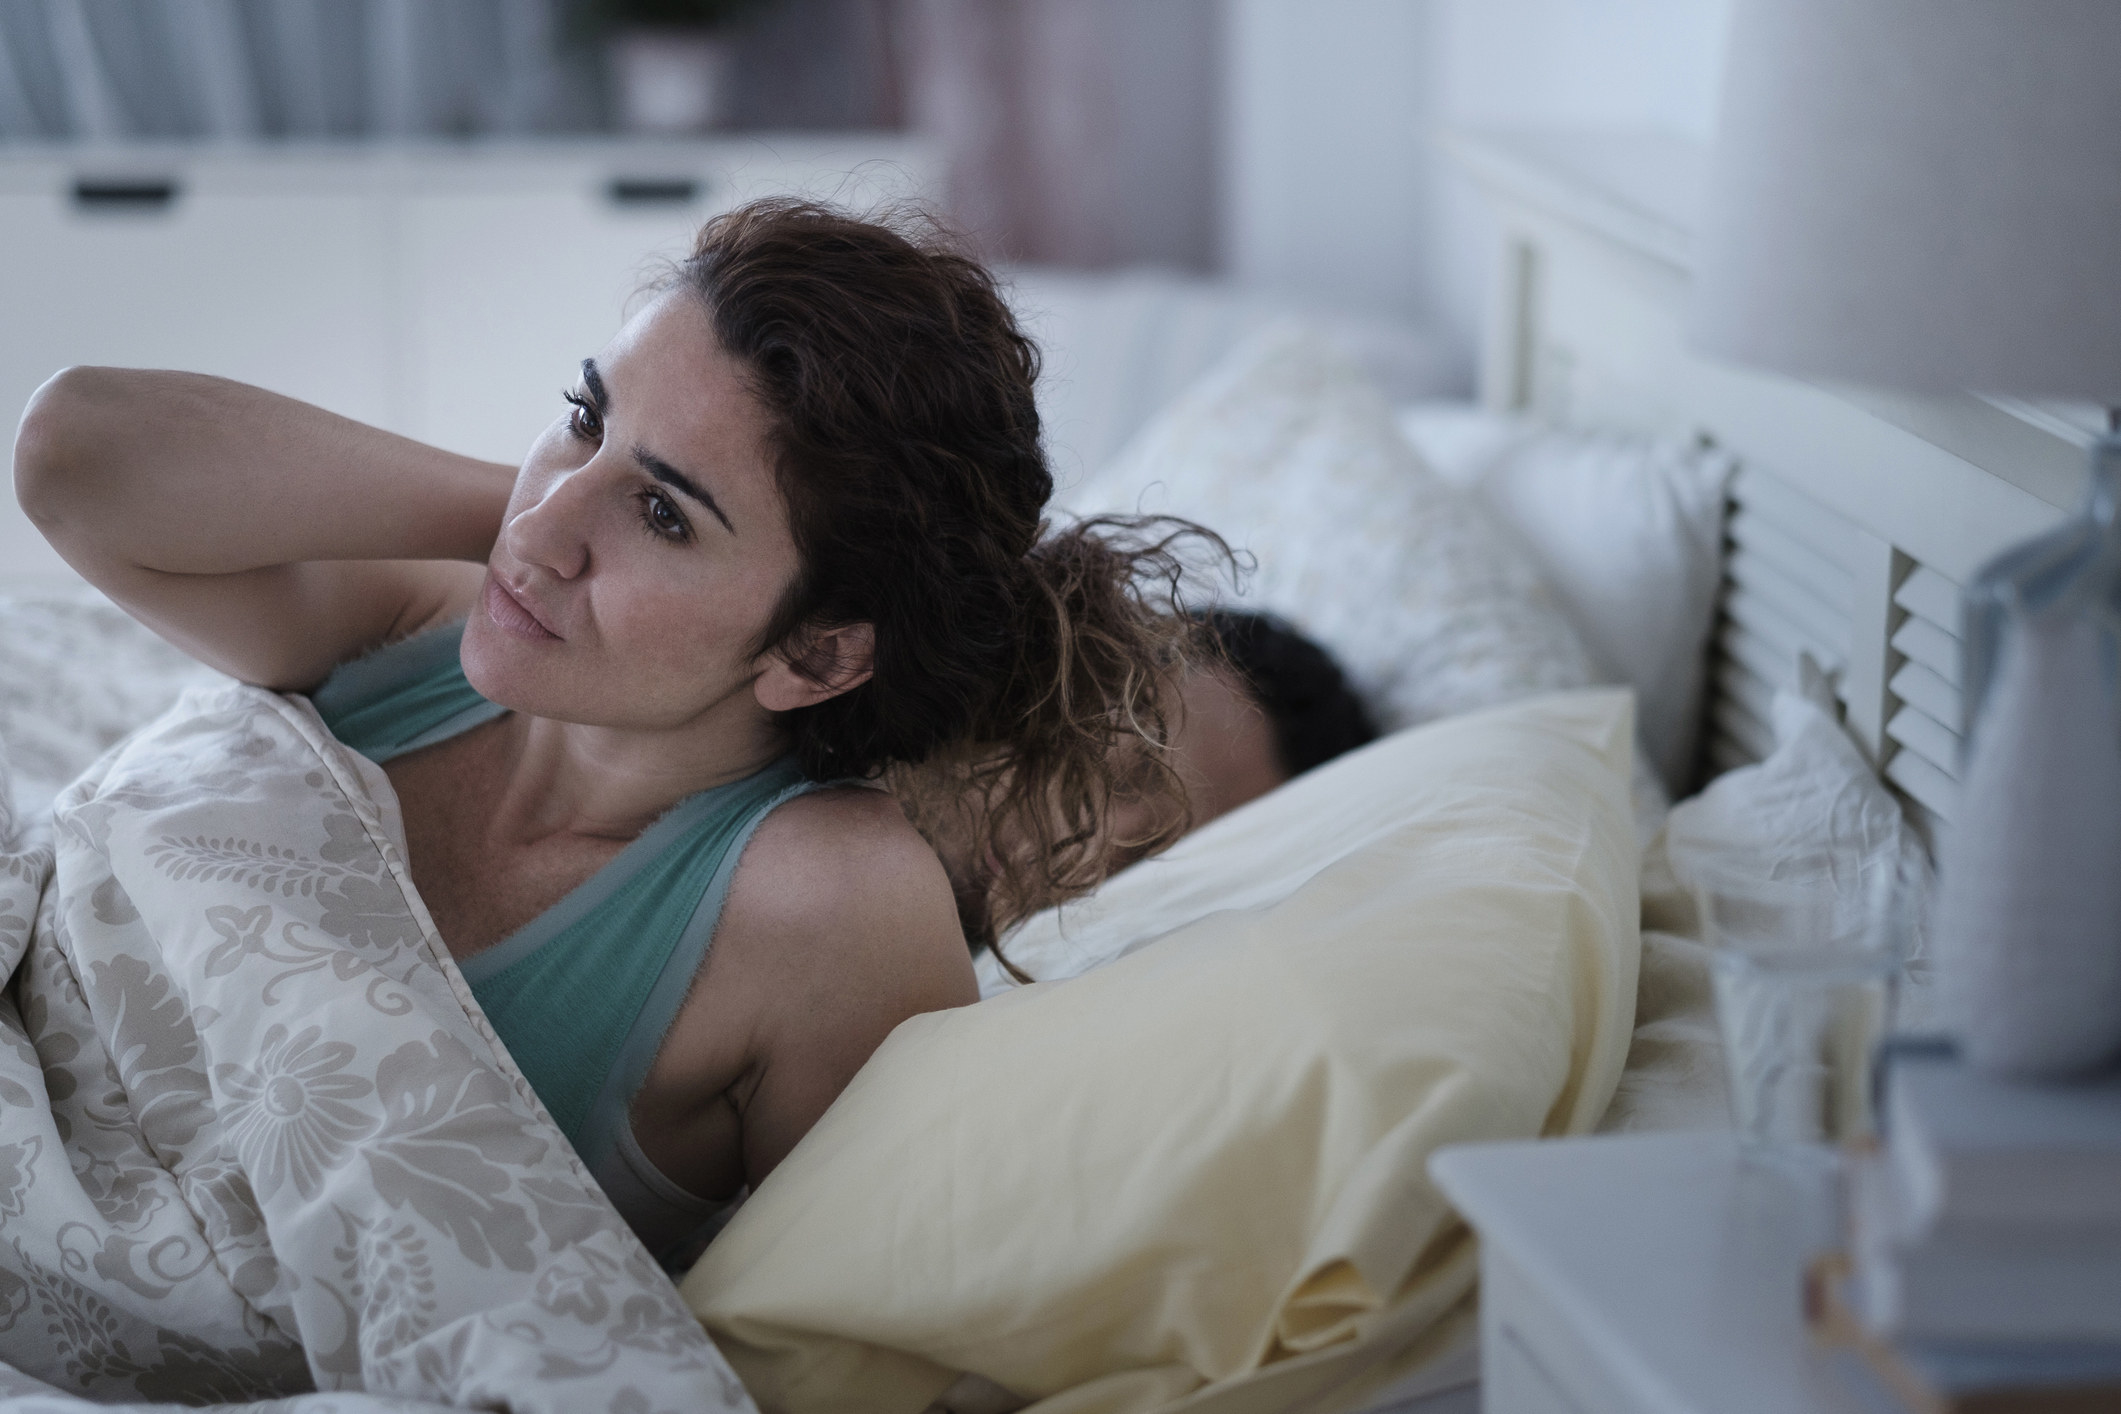 a woman looking distressed and sitting up in bed as a man sleeps next to her